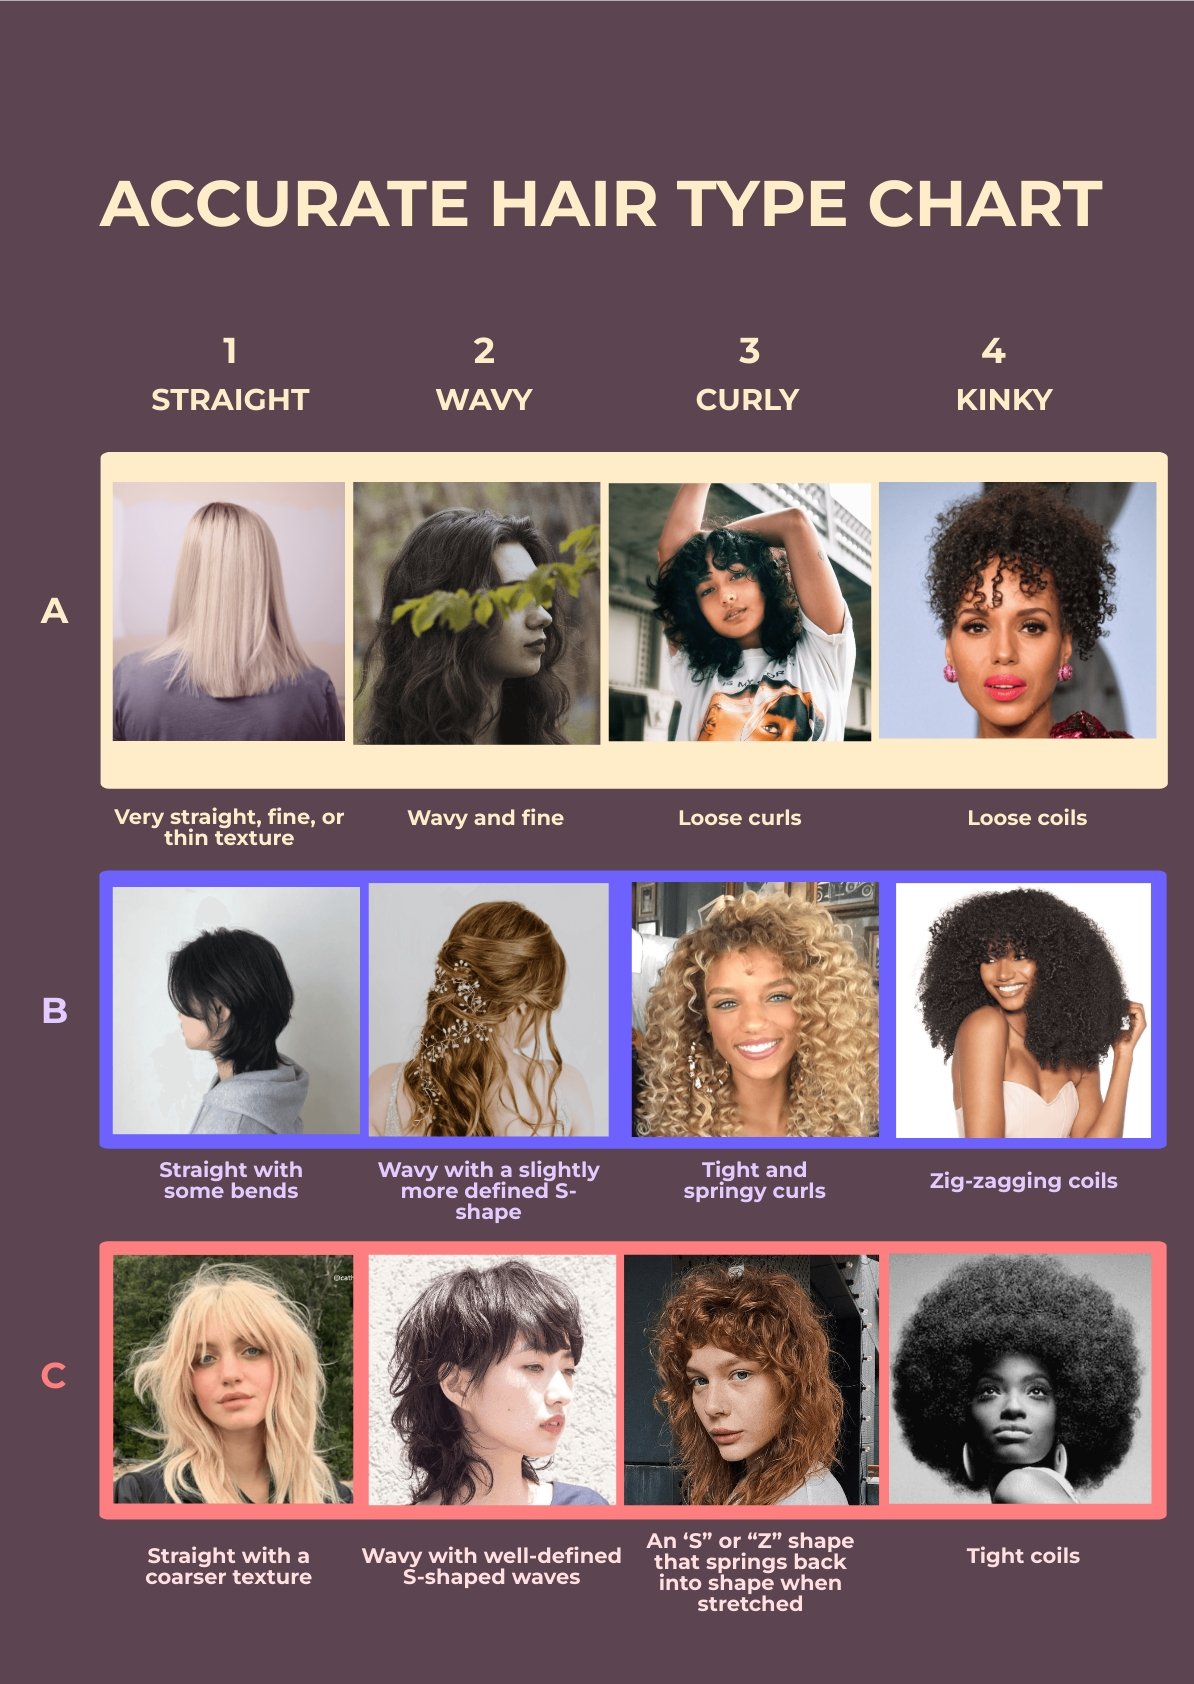 Accurate Hair Type Chart